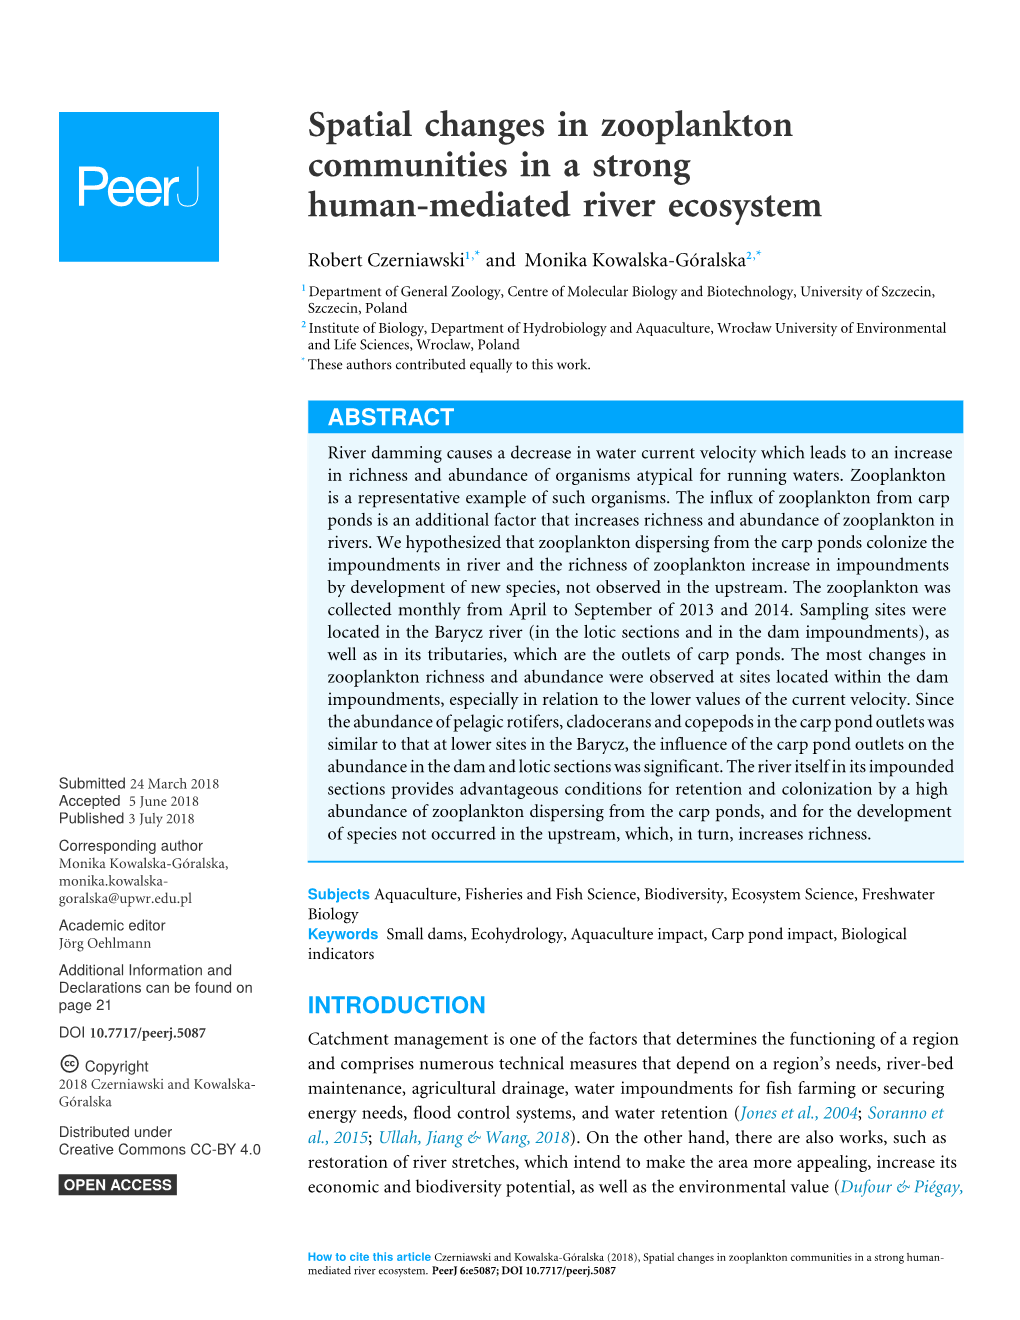 Spatial Changes in Zooplankton Communities in a Strong Human-Mediated River Ecosystem